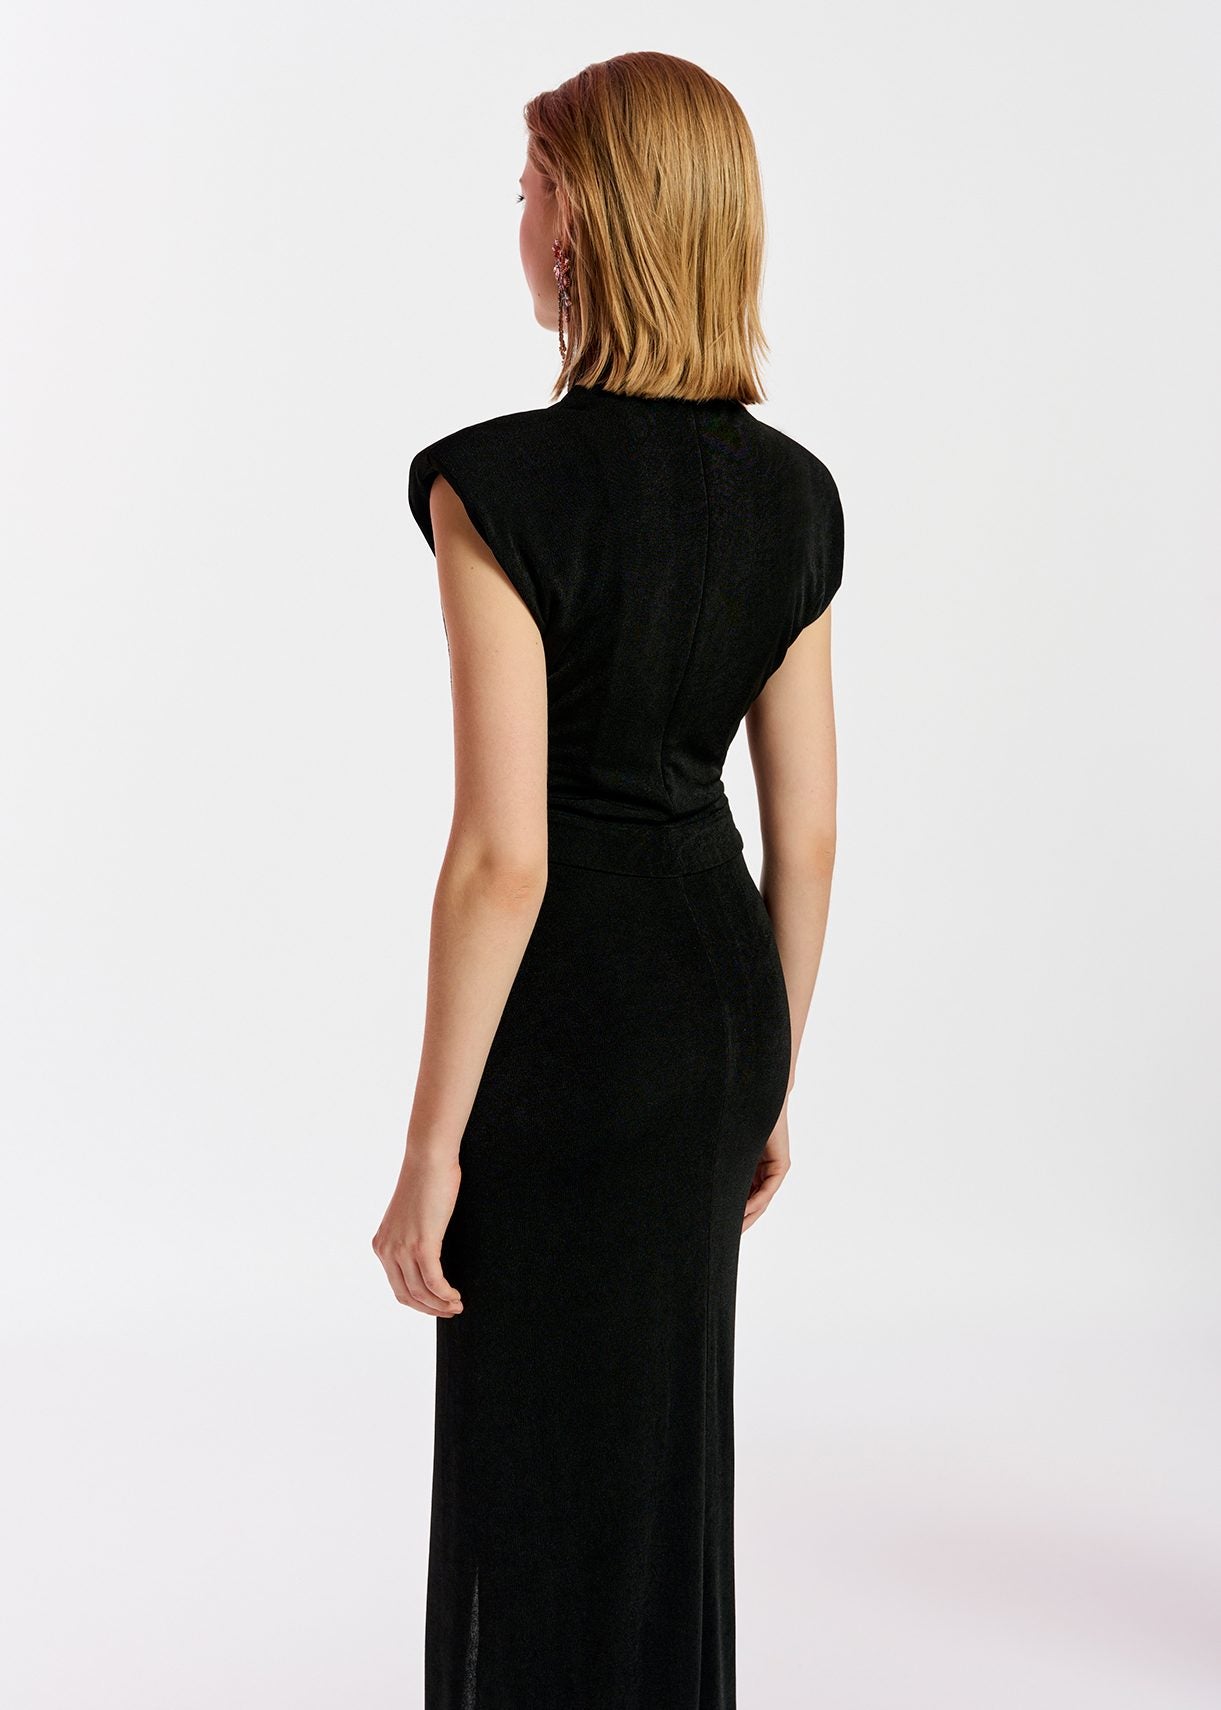 Model wears black midi dress with pleat and slit at front. Back view.